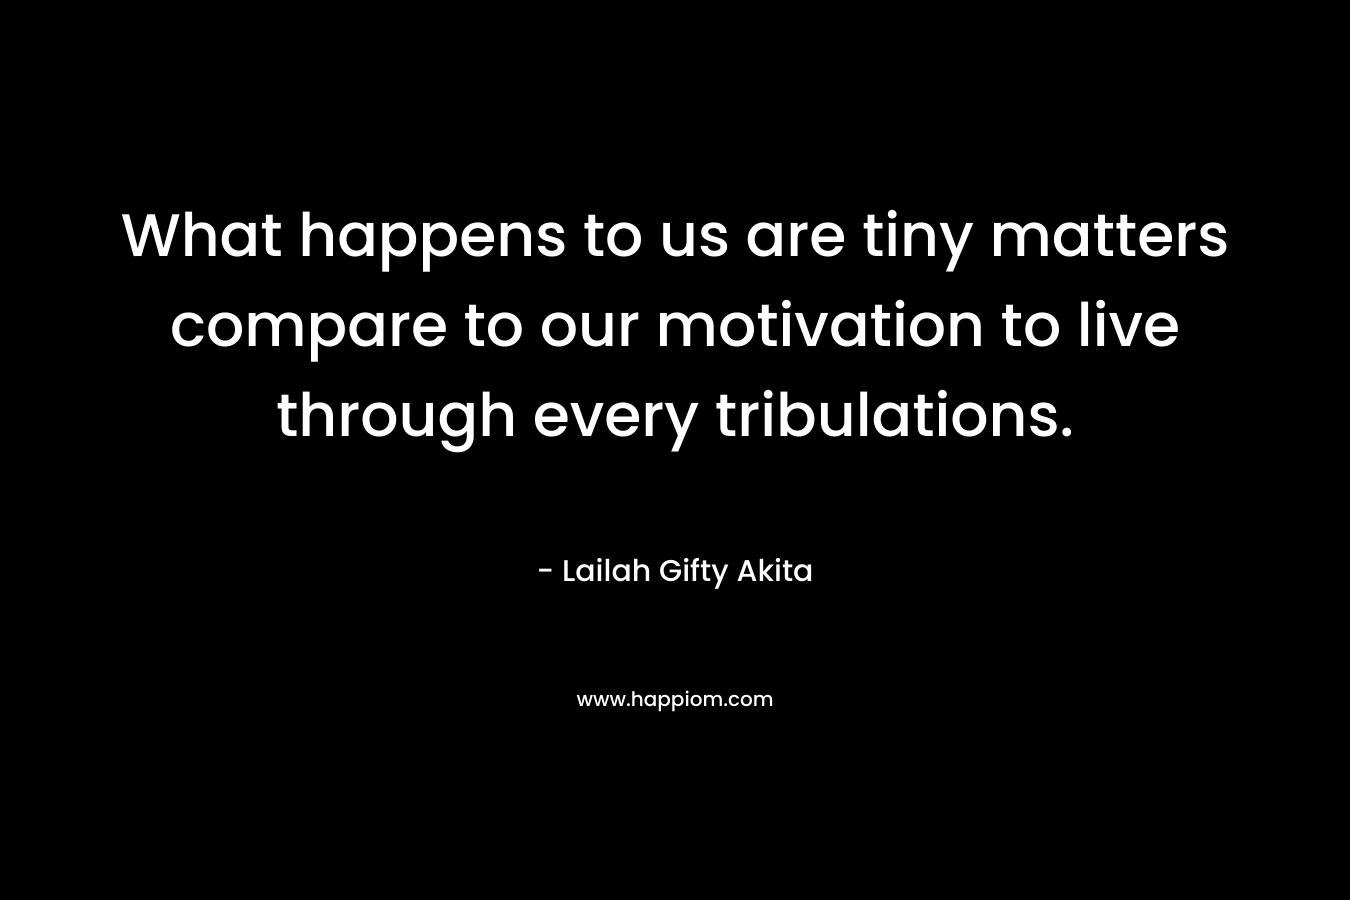 What happens to us are tiny matters compare to our motivation to live through every tribulations.